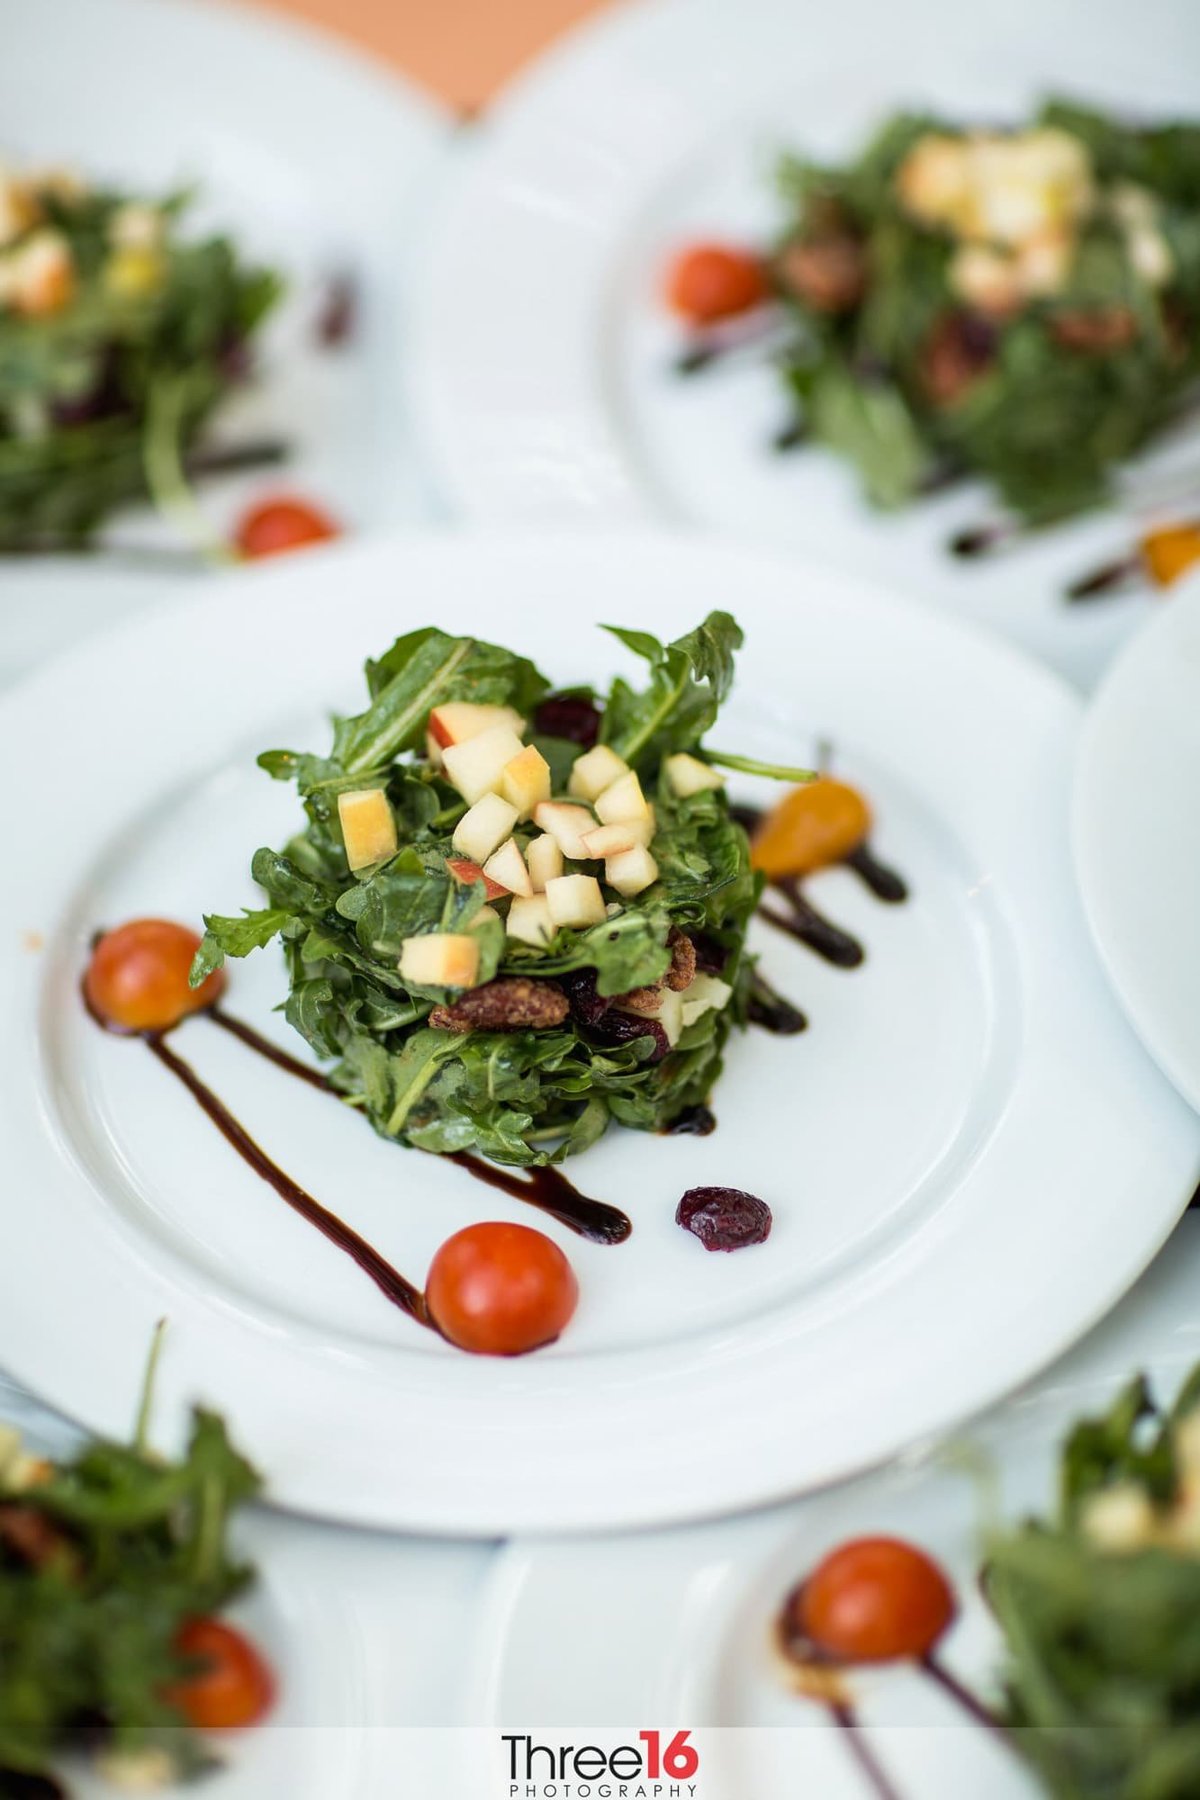 Beautifully designed plate of salad by 24  Carrot Catering